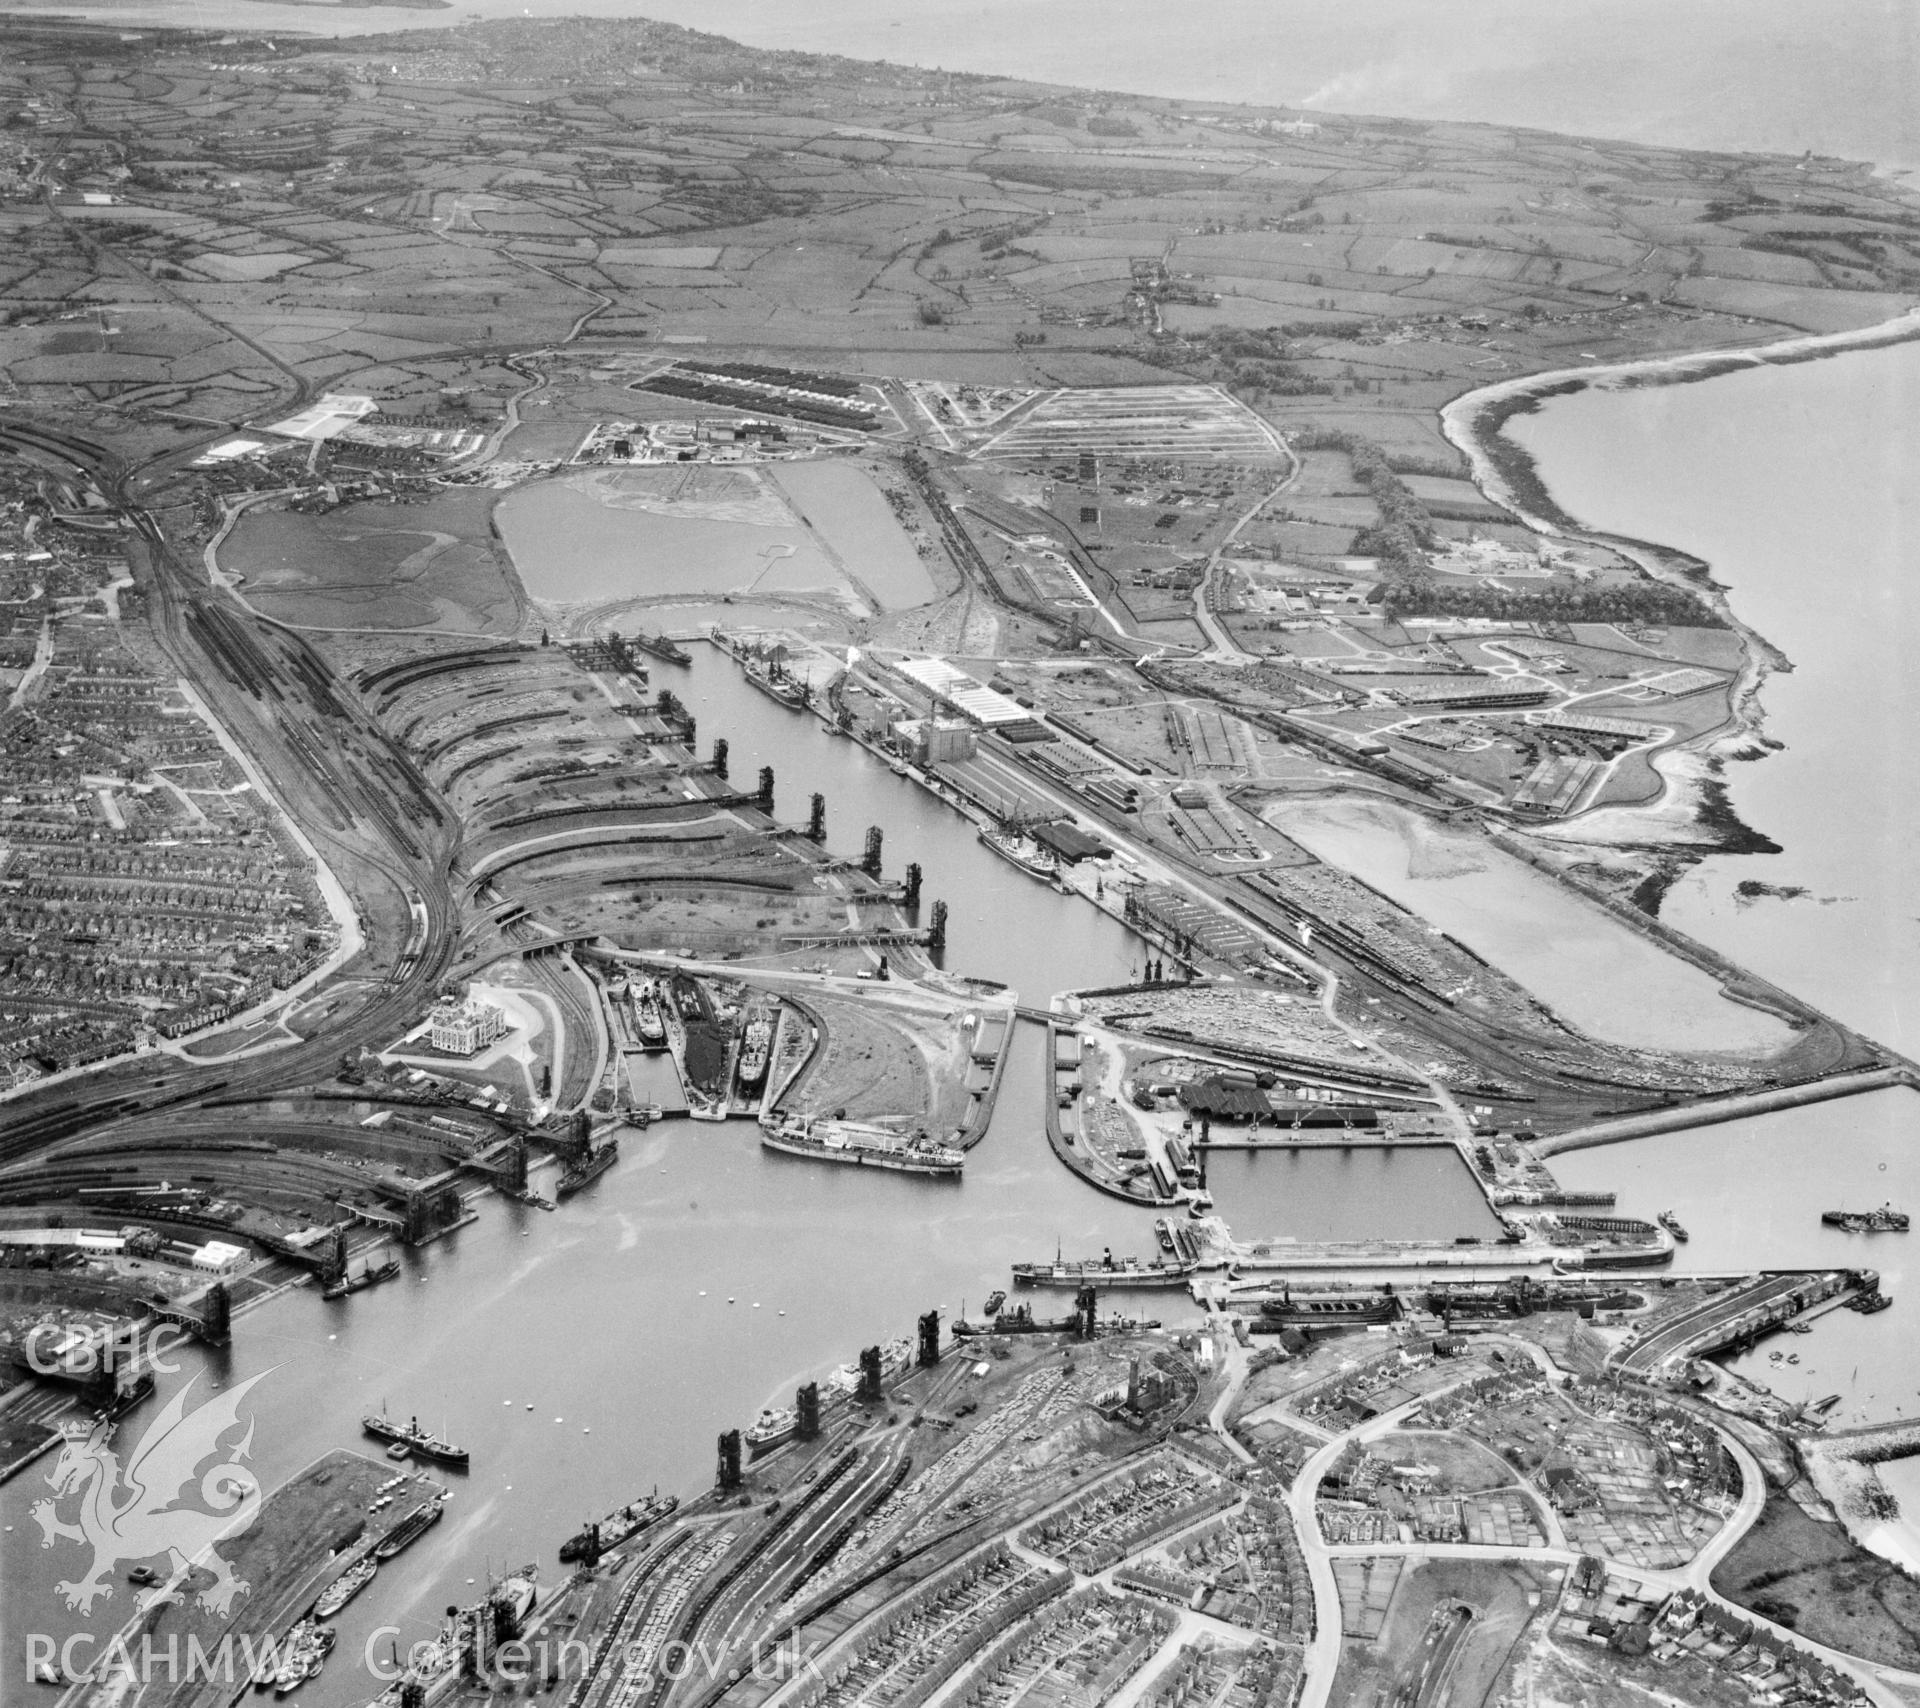 General view of Barry showing docks